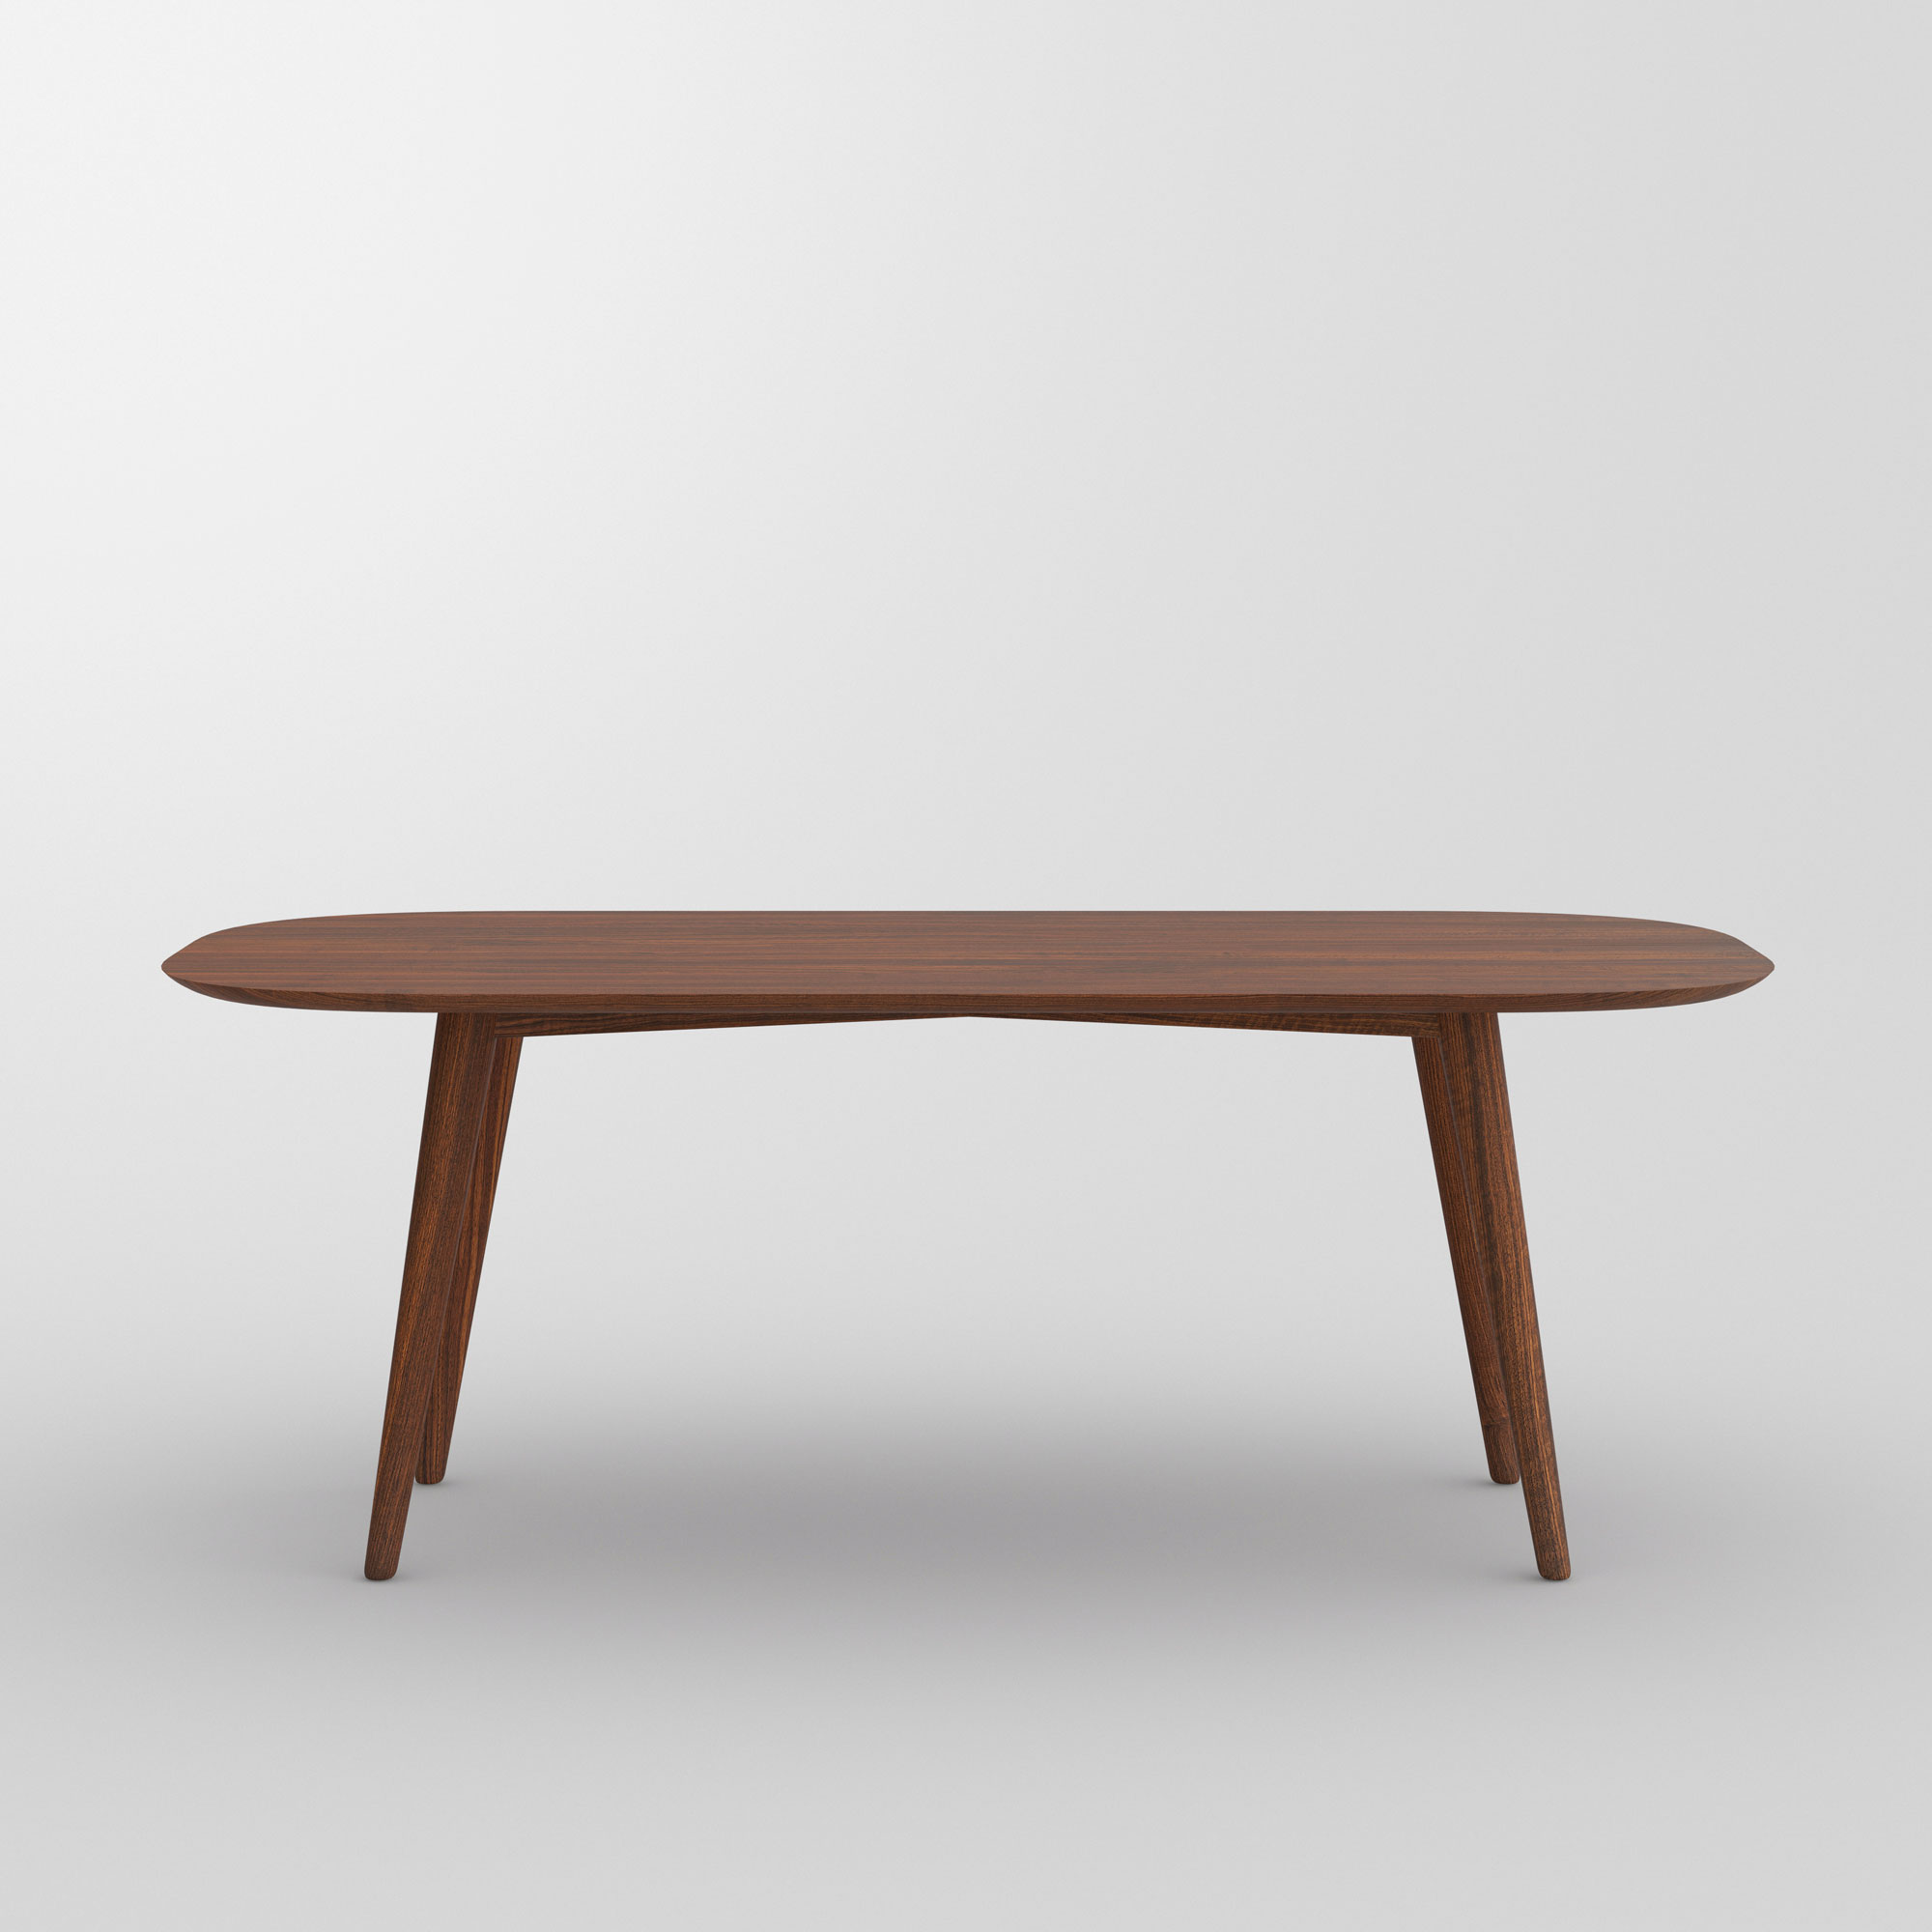 Oval Dining Table AMBIO vitamin-design custom made in solid wood by vitamin design